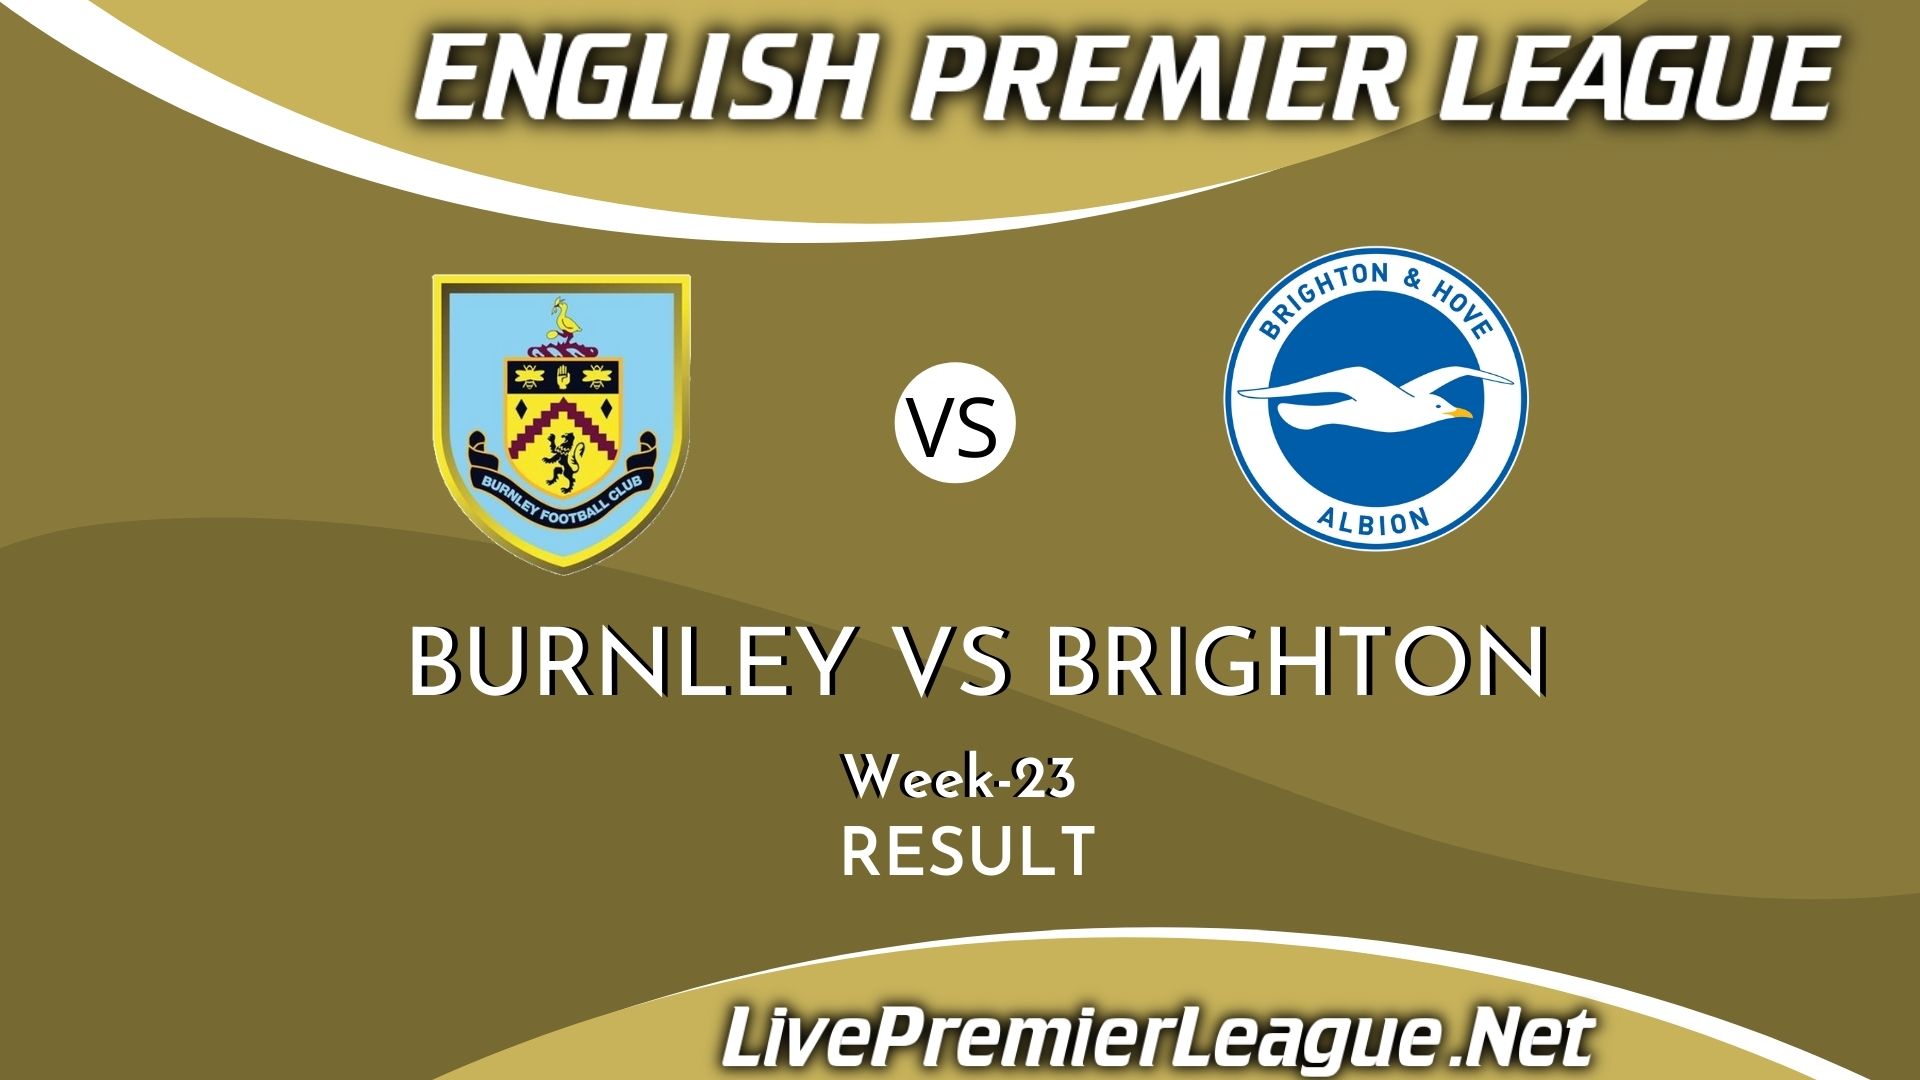 Burnley Vs Brighton and Hove Albion | Result 2021 EPL Week 23